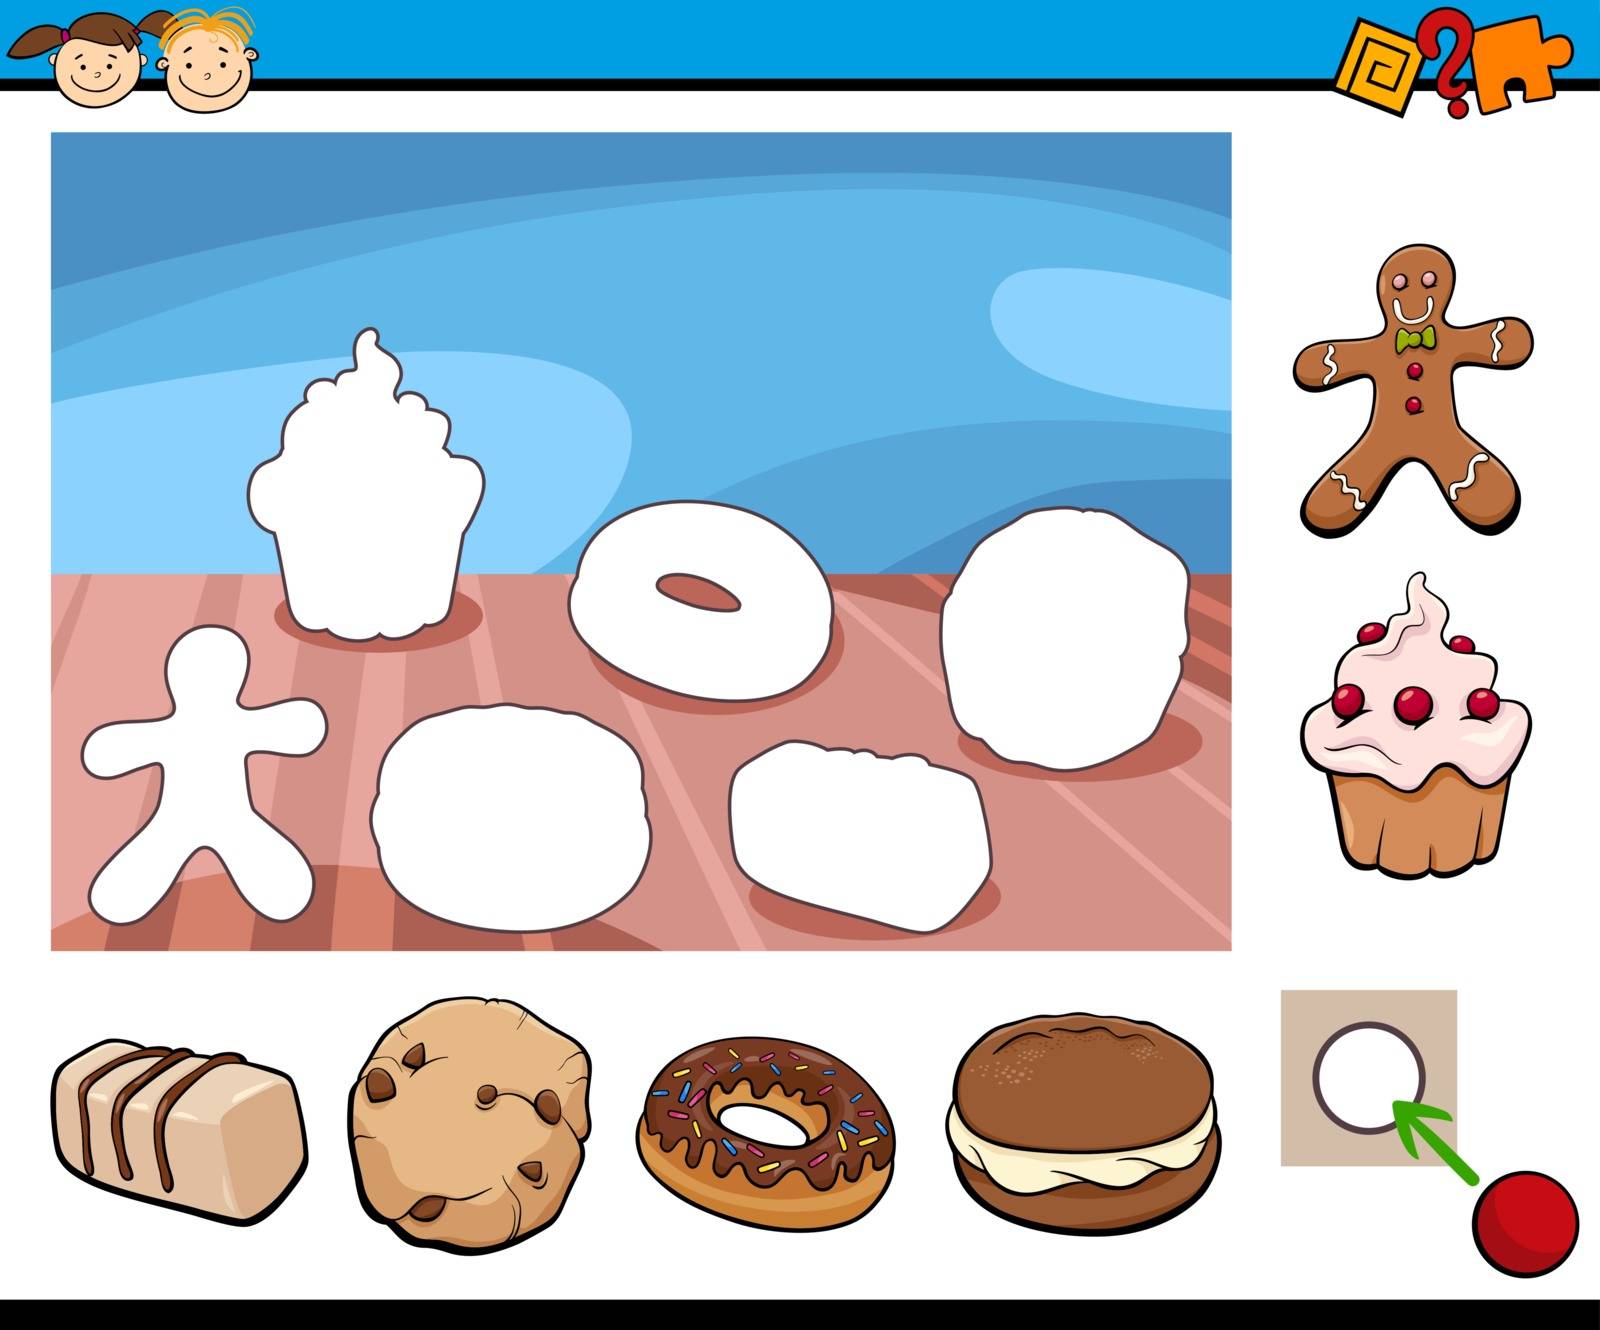 Cartoon Illustration of Educational Task for Preschool Children with Sweets and Cookies